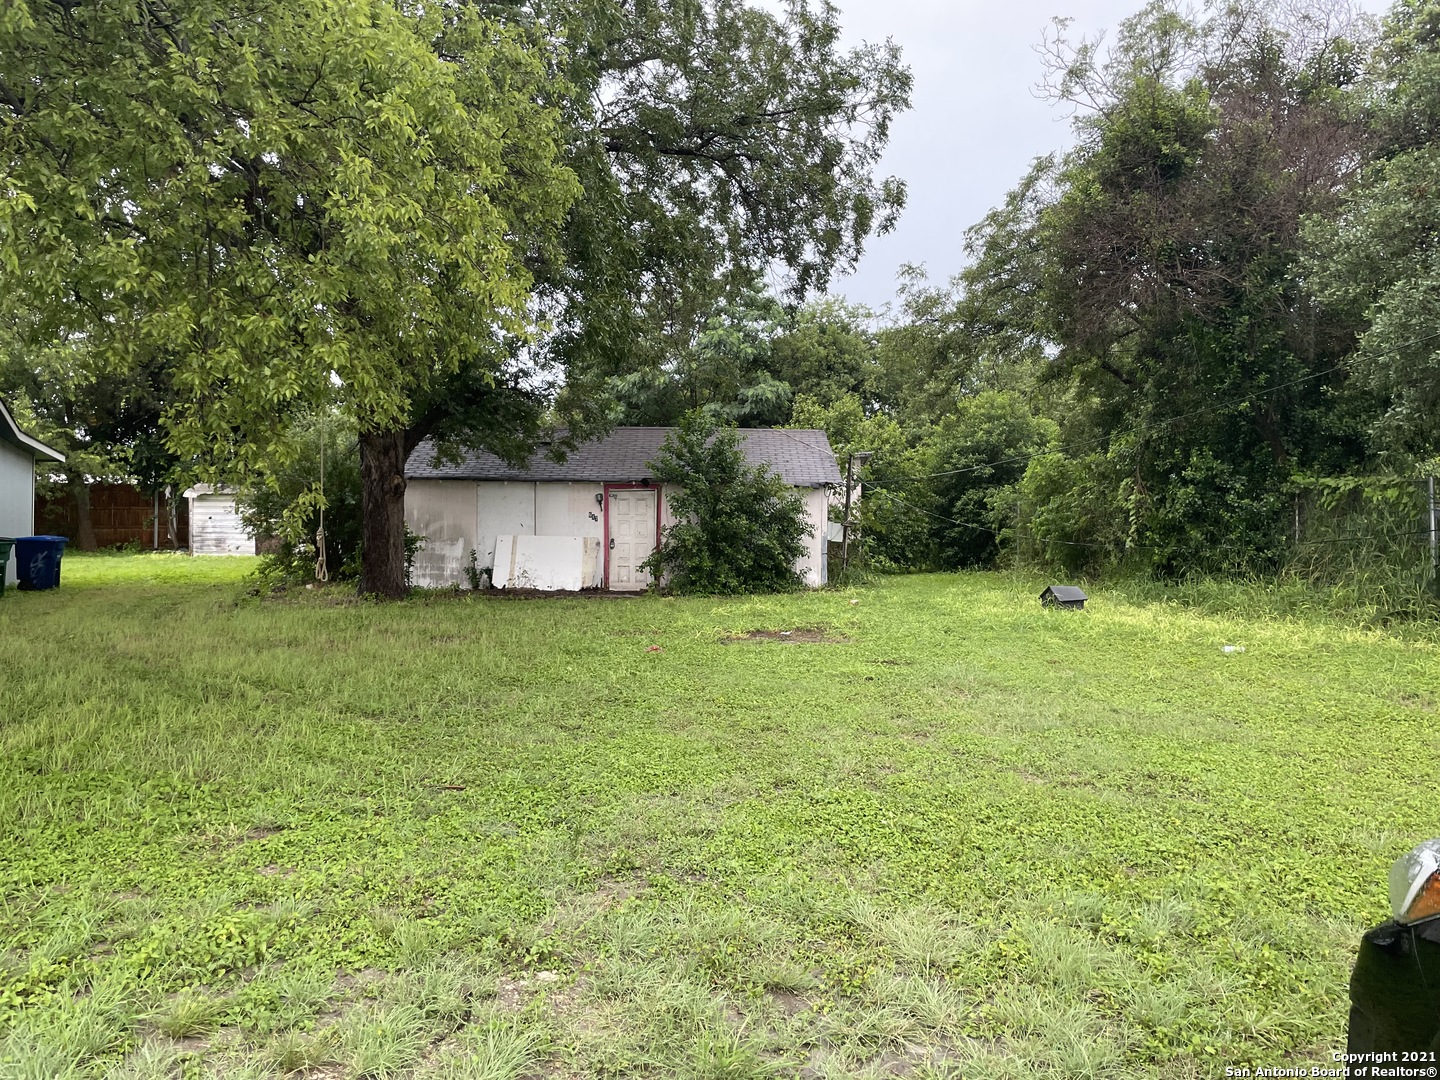 Investors delight. 2 bedroom/1 bath in the Historical area near the San Antonio Missions National Historical Park, Mission Library, Mission Outdoor Theater, minutes from South Town. Property is in need of complete remodeling and can be used as residential or commercial.